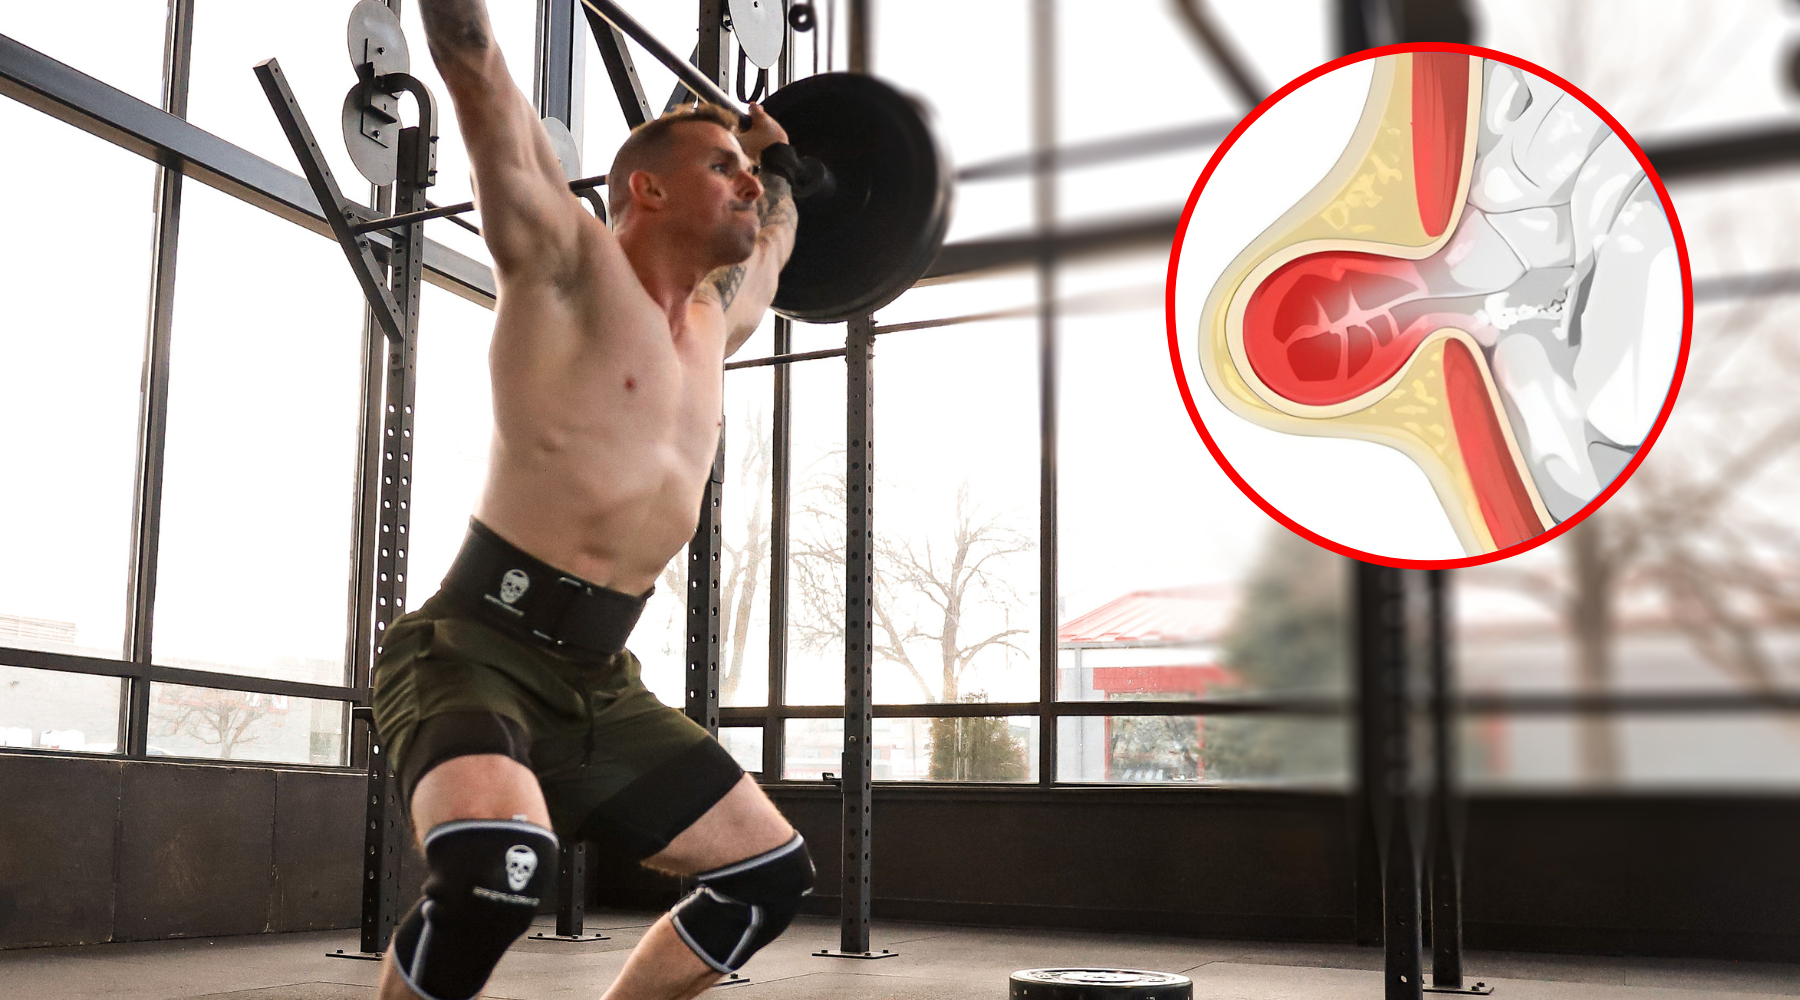 Does A Lifting Belt Prevent Hernias? (A PT Answers)